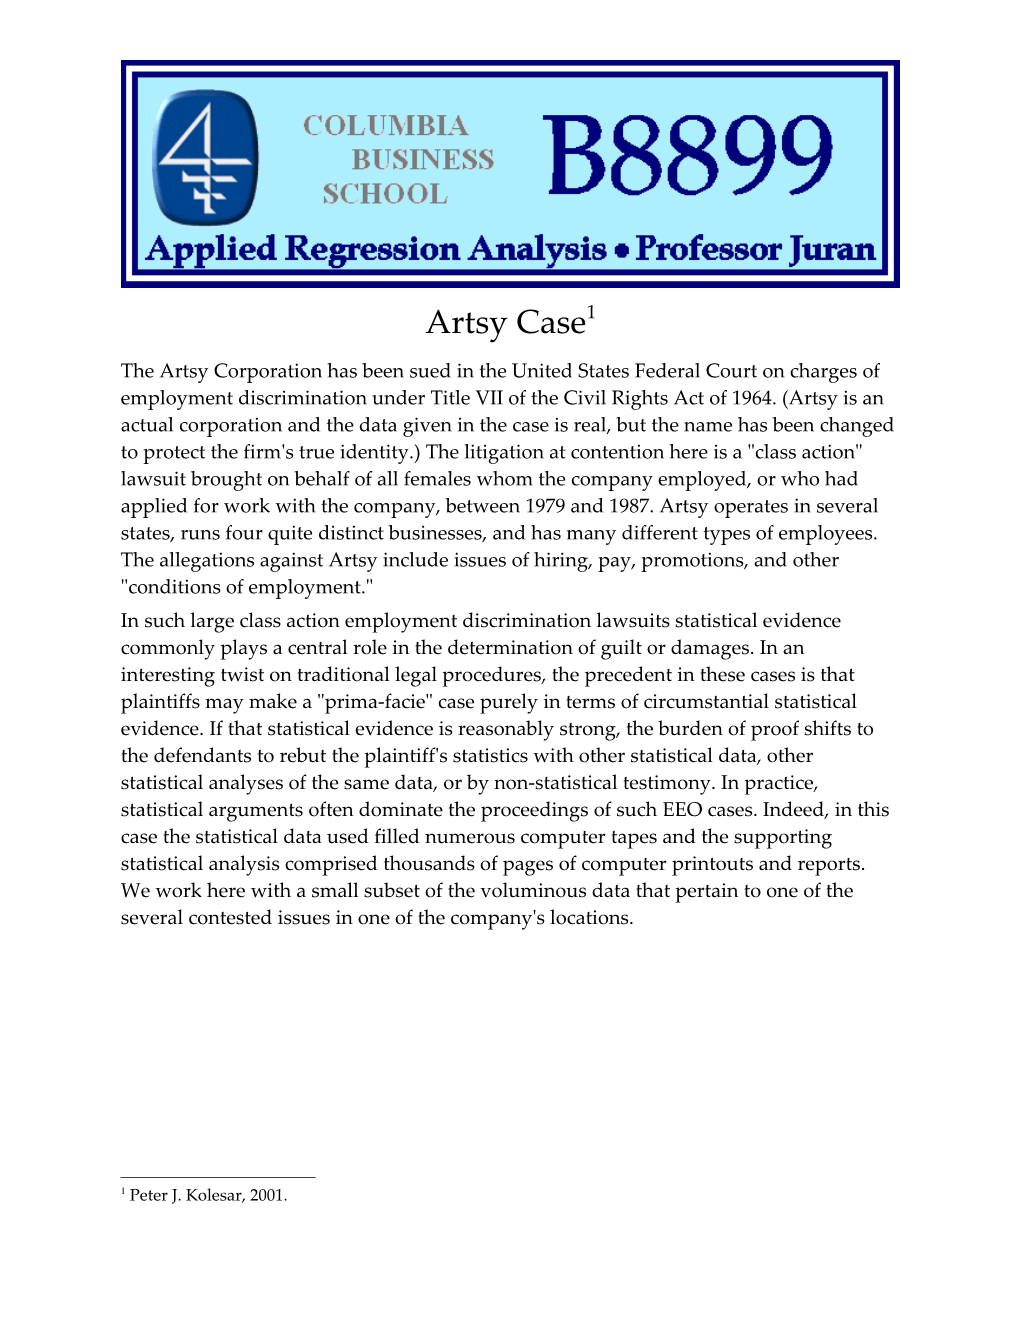 The Artsy Corporation Has Been Sued in the United States Federal Court on Charges of Employment